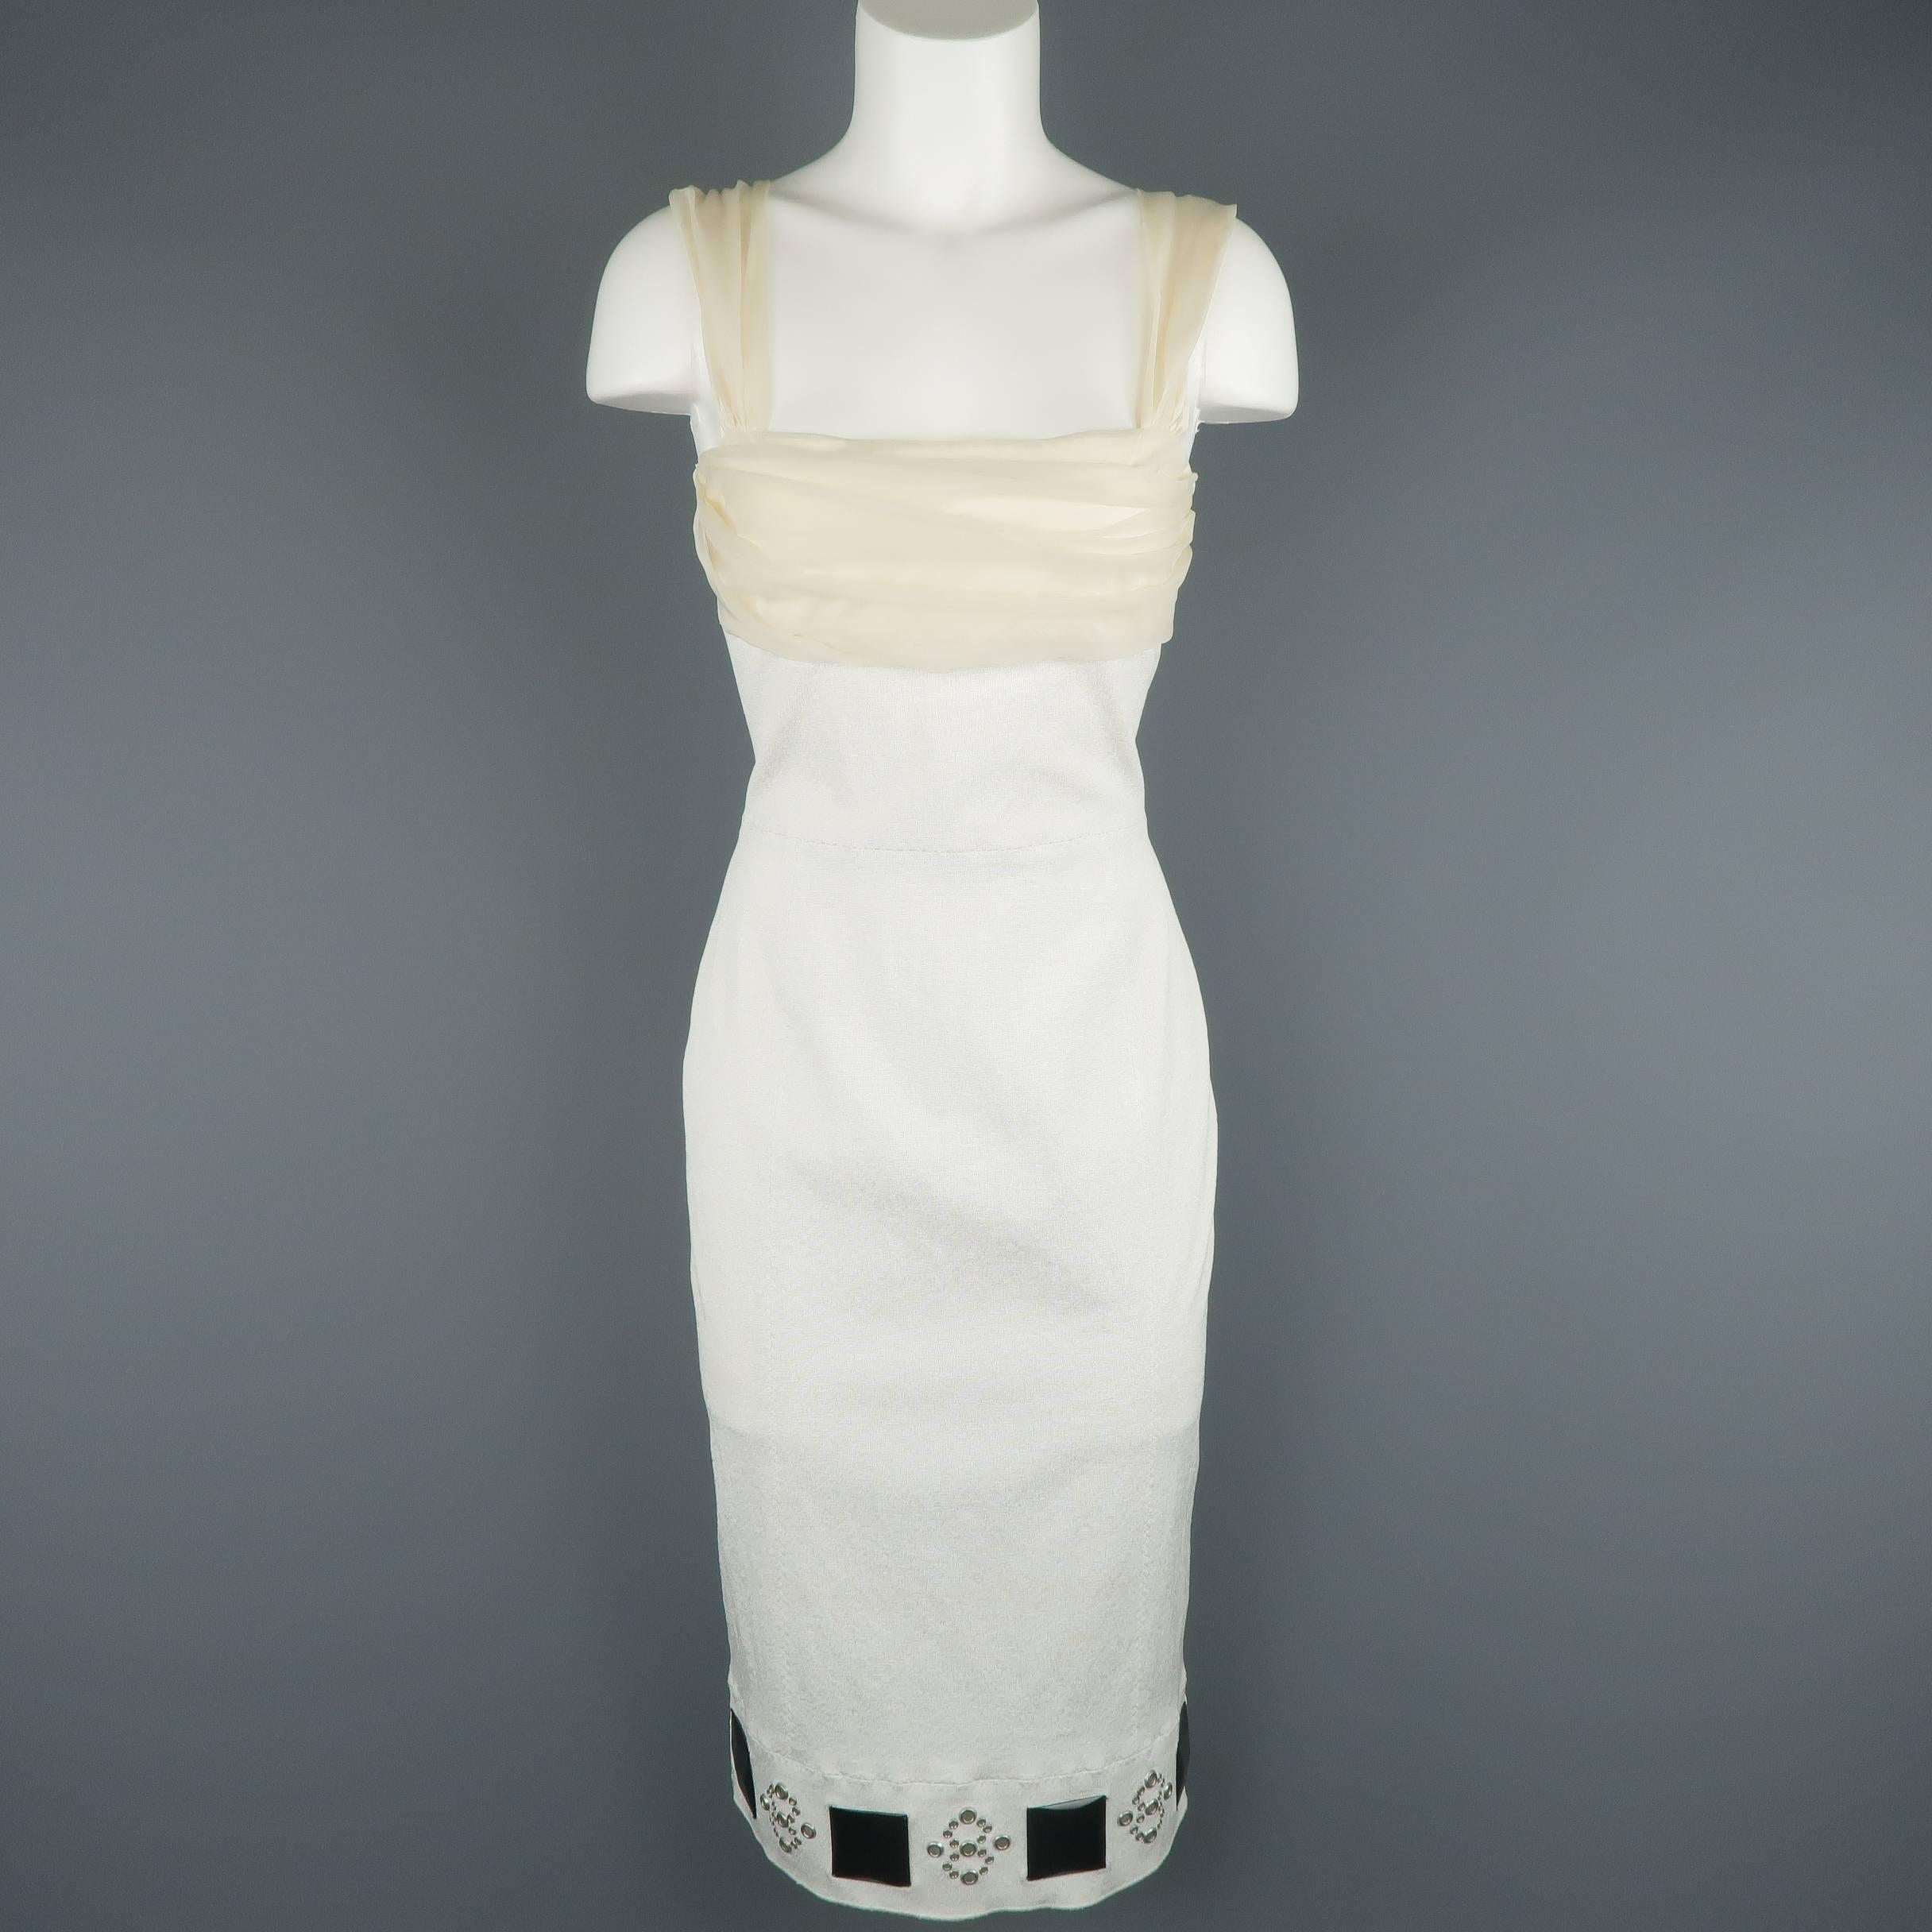 Louis Vuitton cocktail dress comes in white stretch crepe and features beige pleat gathered bust and straps, embellished hem with black studs and silver tone grommets, and detachable belt with tulle ruffle accents. Imperfection on belt stud.  Made